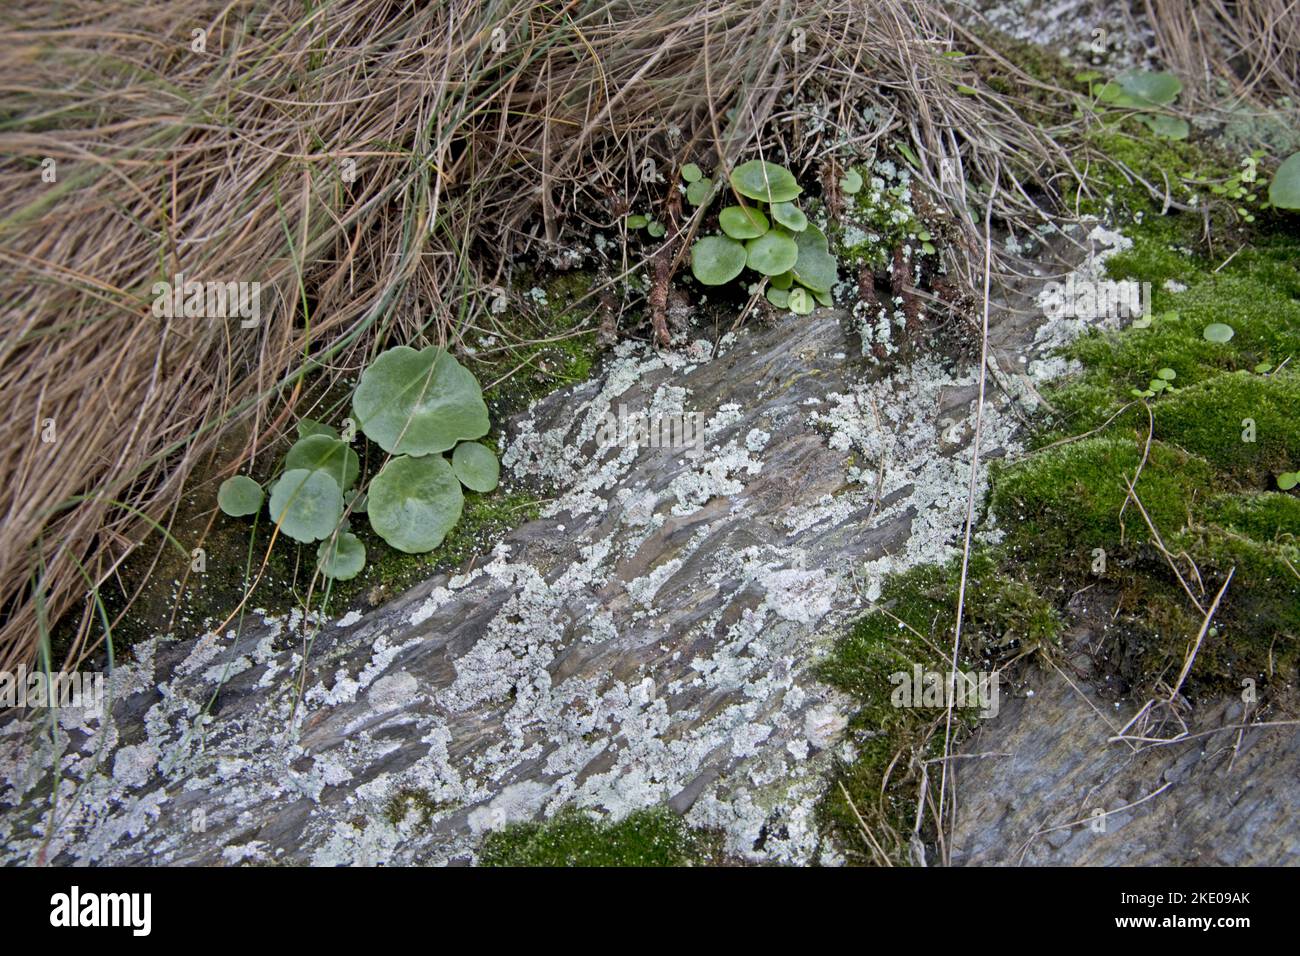 Small clumps of pennywort Umbilicus rupestris with adjacent lichens and mosses on exposed coastal rock face Ilfracombe Stock Photo